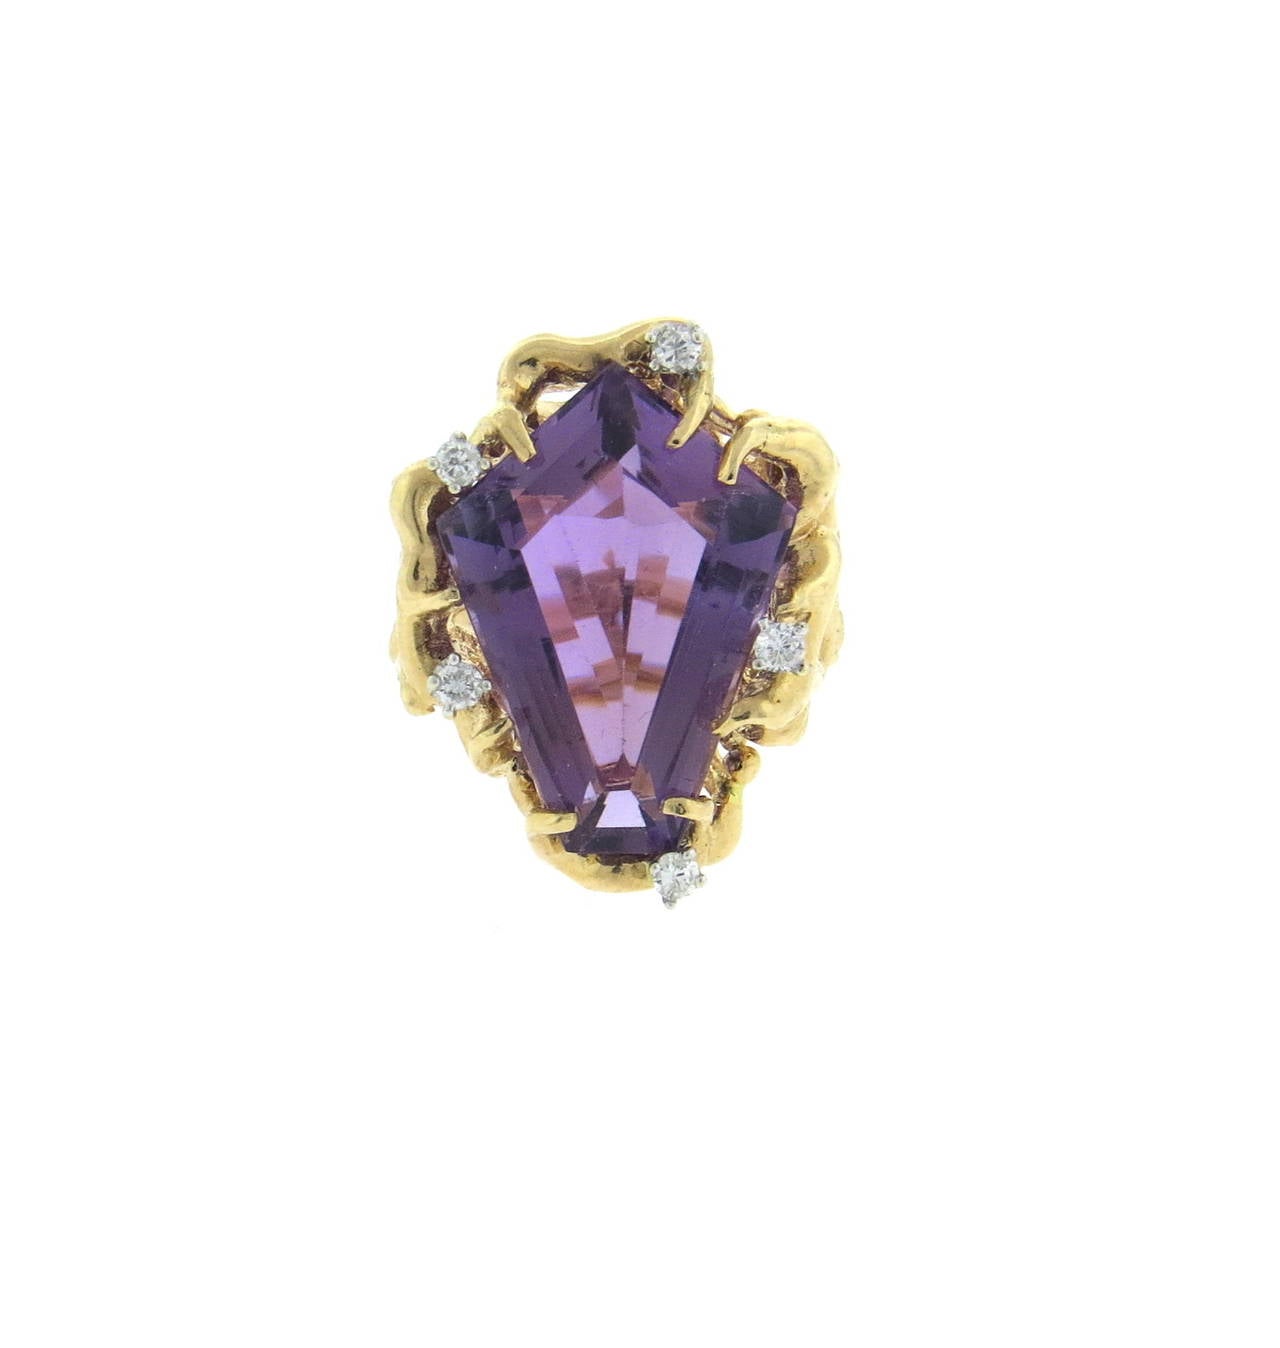 1970s 14k gold free form ring, set with amethyst gemstone, surrounded with five diamonds (approximately 0.25ctw) . Ring is a size 7 1/2, ring top is 27mm x 21mm. Weight of the piece - 16.4 grams